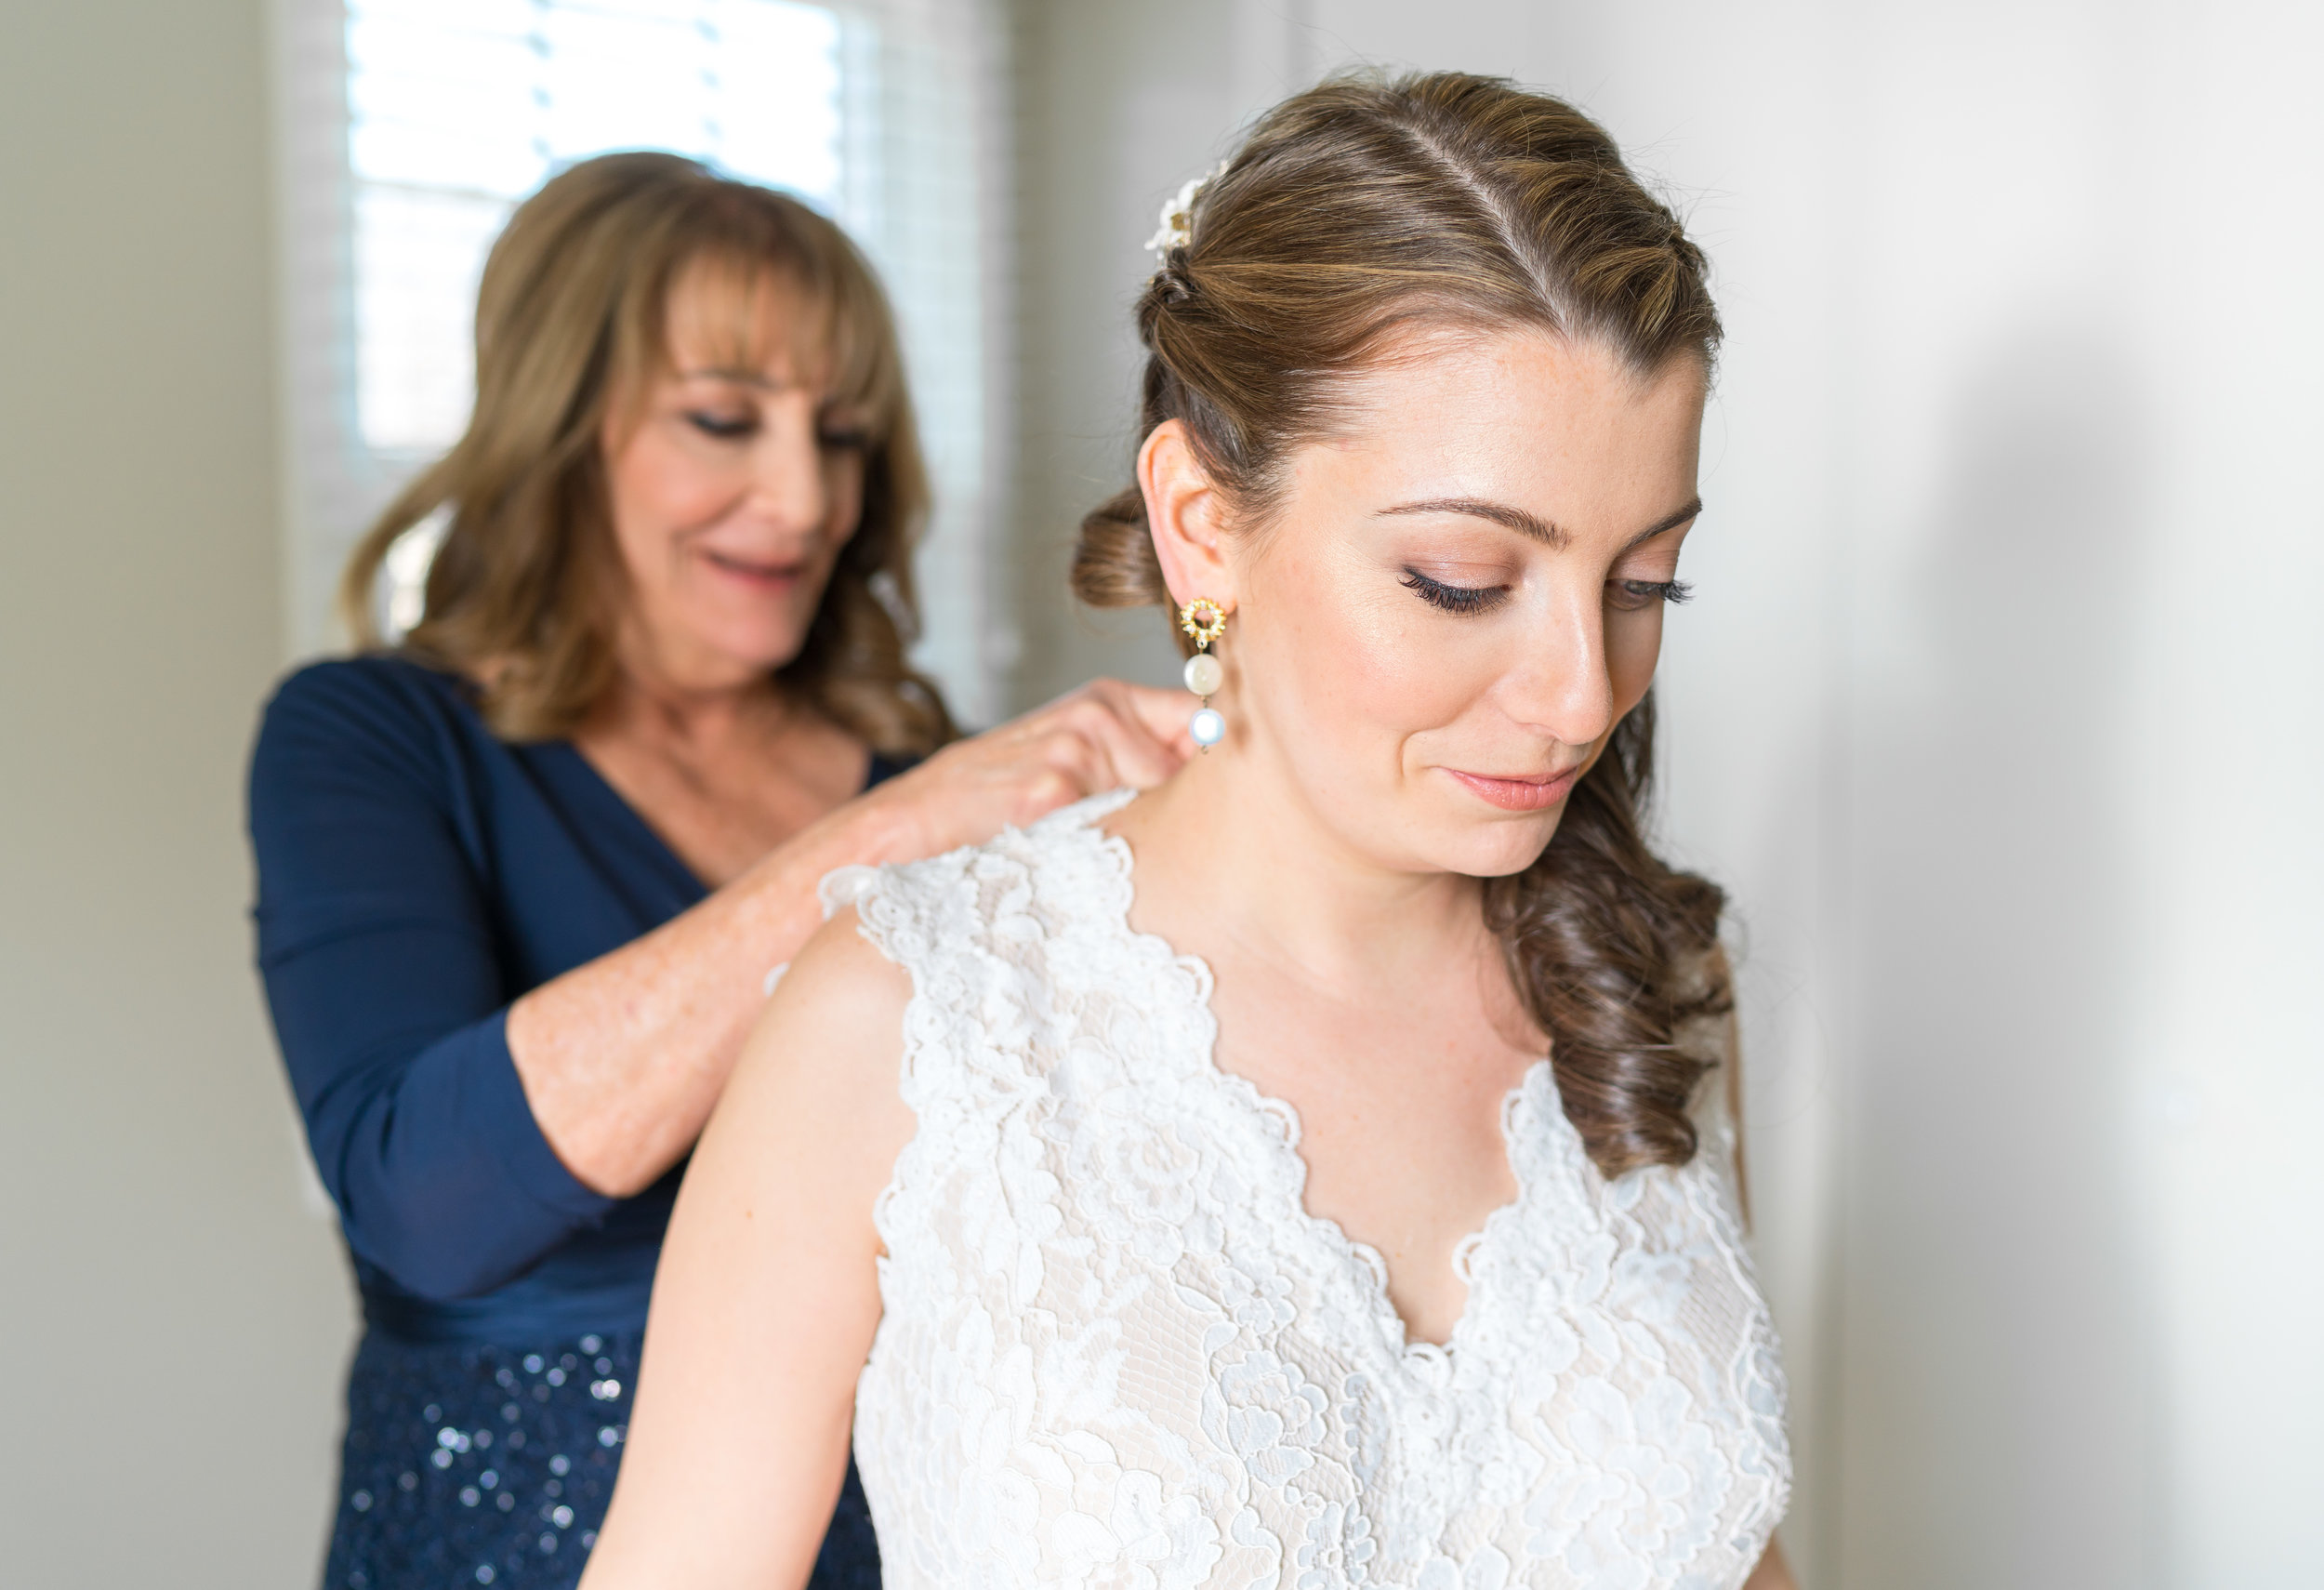 Mom buttoning bride's dress in Chevy Chase home